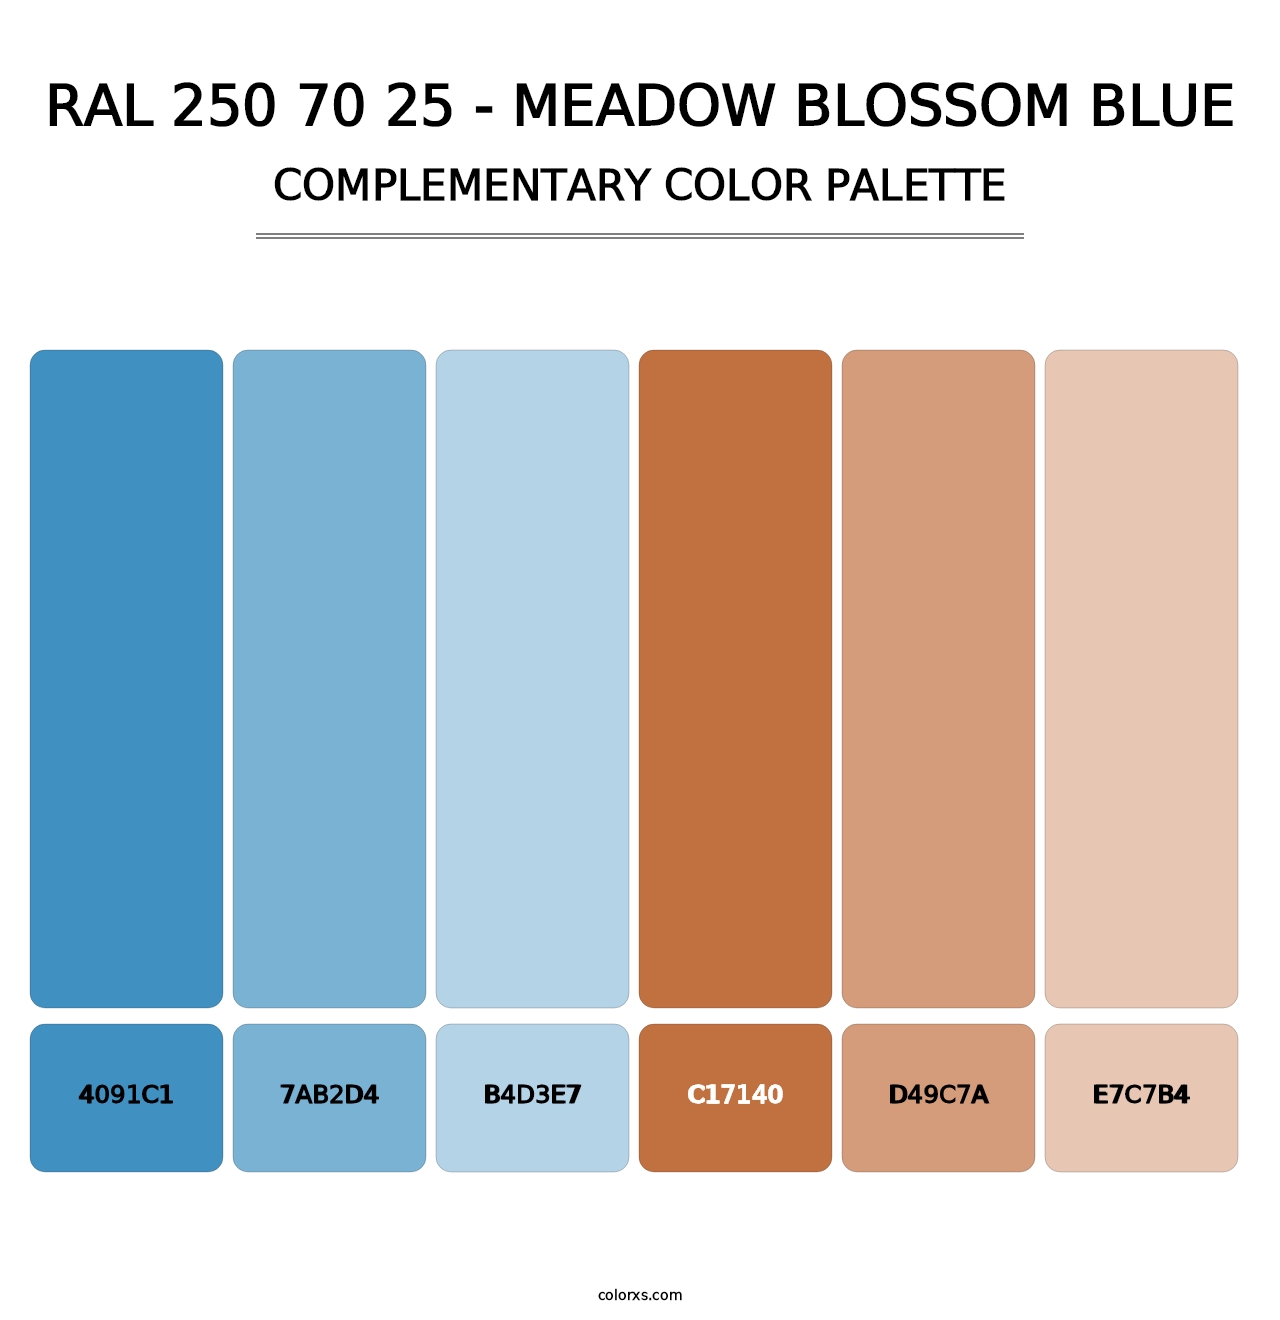 RAL 250 70 25 - Meadow Blossom Blue - Complementary Color Palette